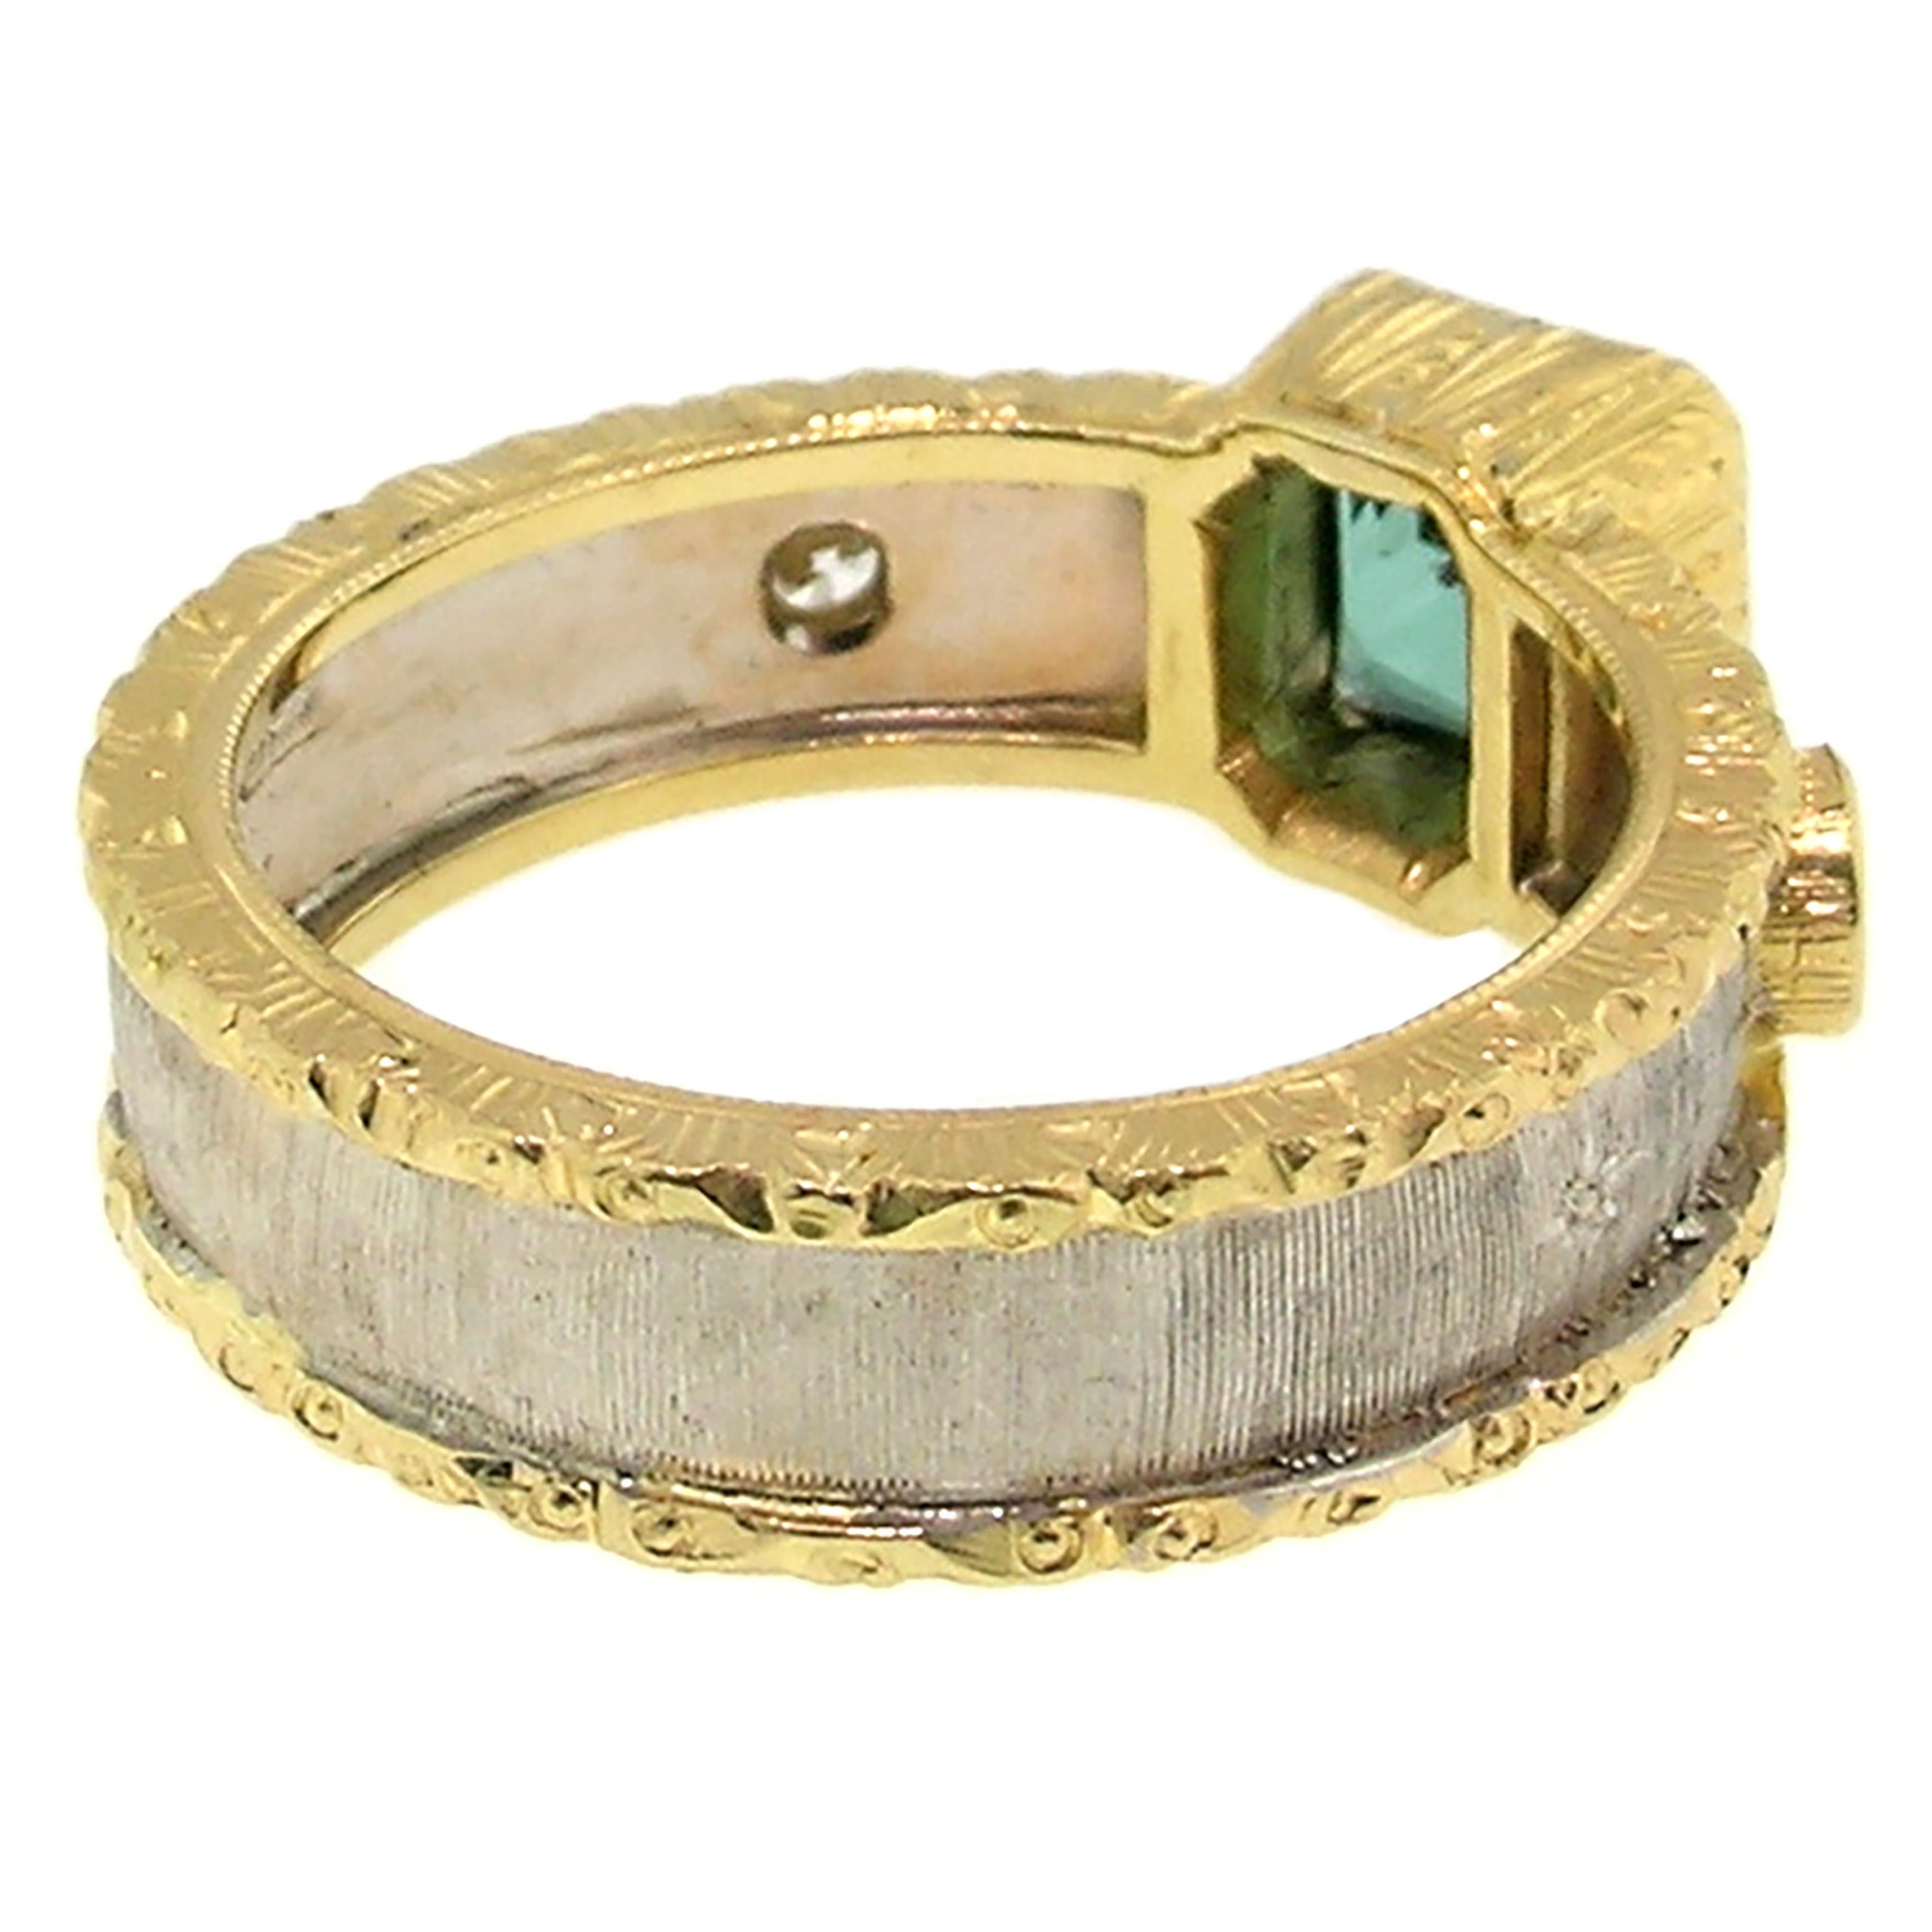 Tourmaline and Diamond 18kt Ring, Made in Italy by Cynthia Scott Jewelry In New Condition For Sale In Logan, UT